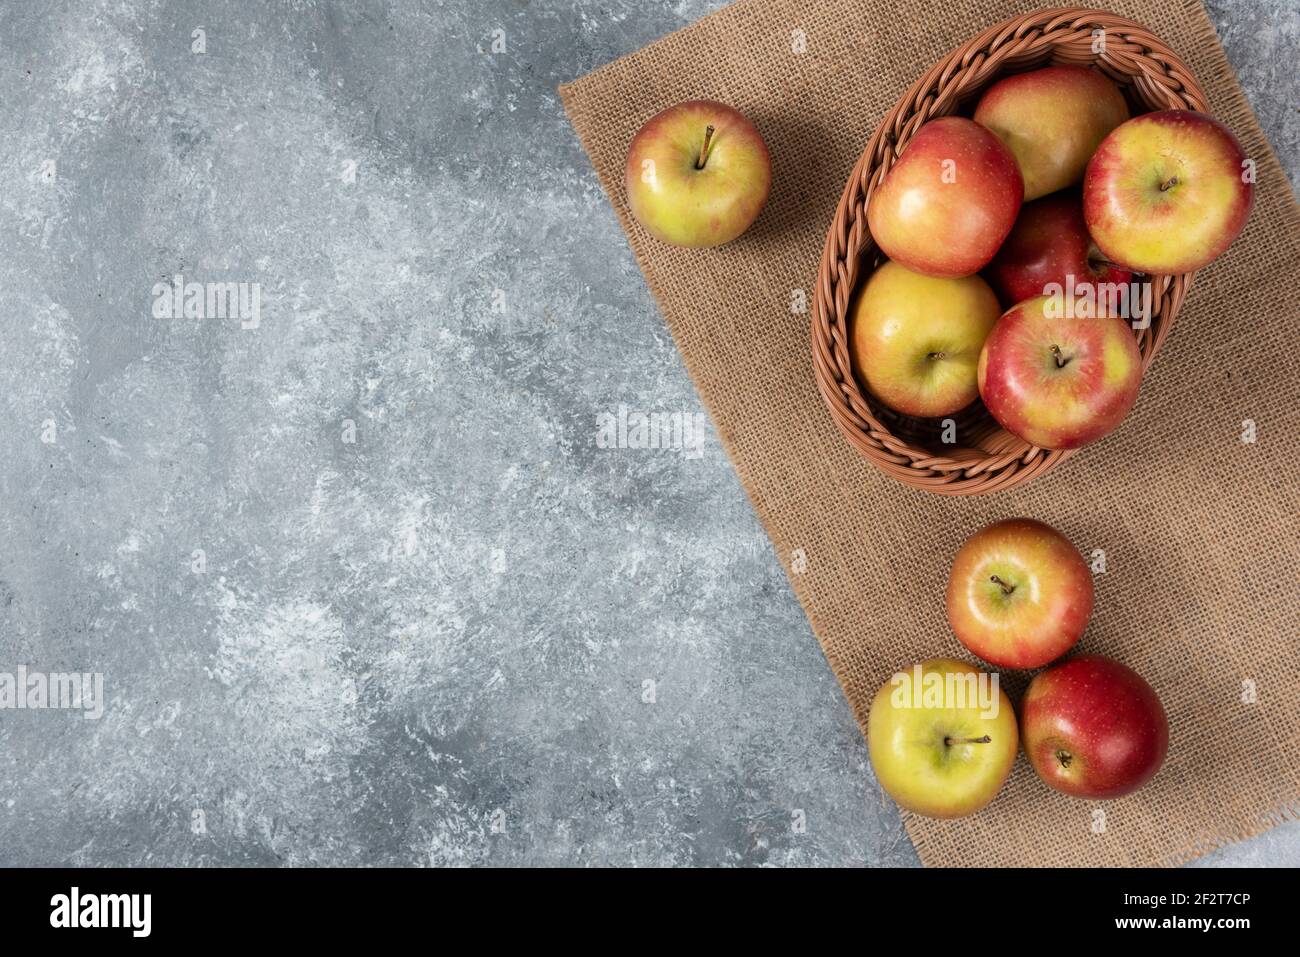 Wicker basket of ripe shiny apples on marble surface Stock Photo